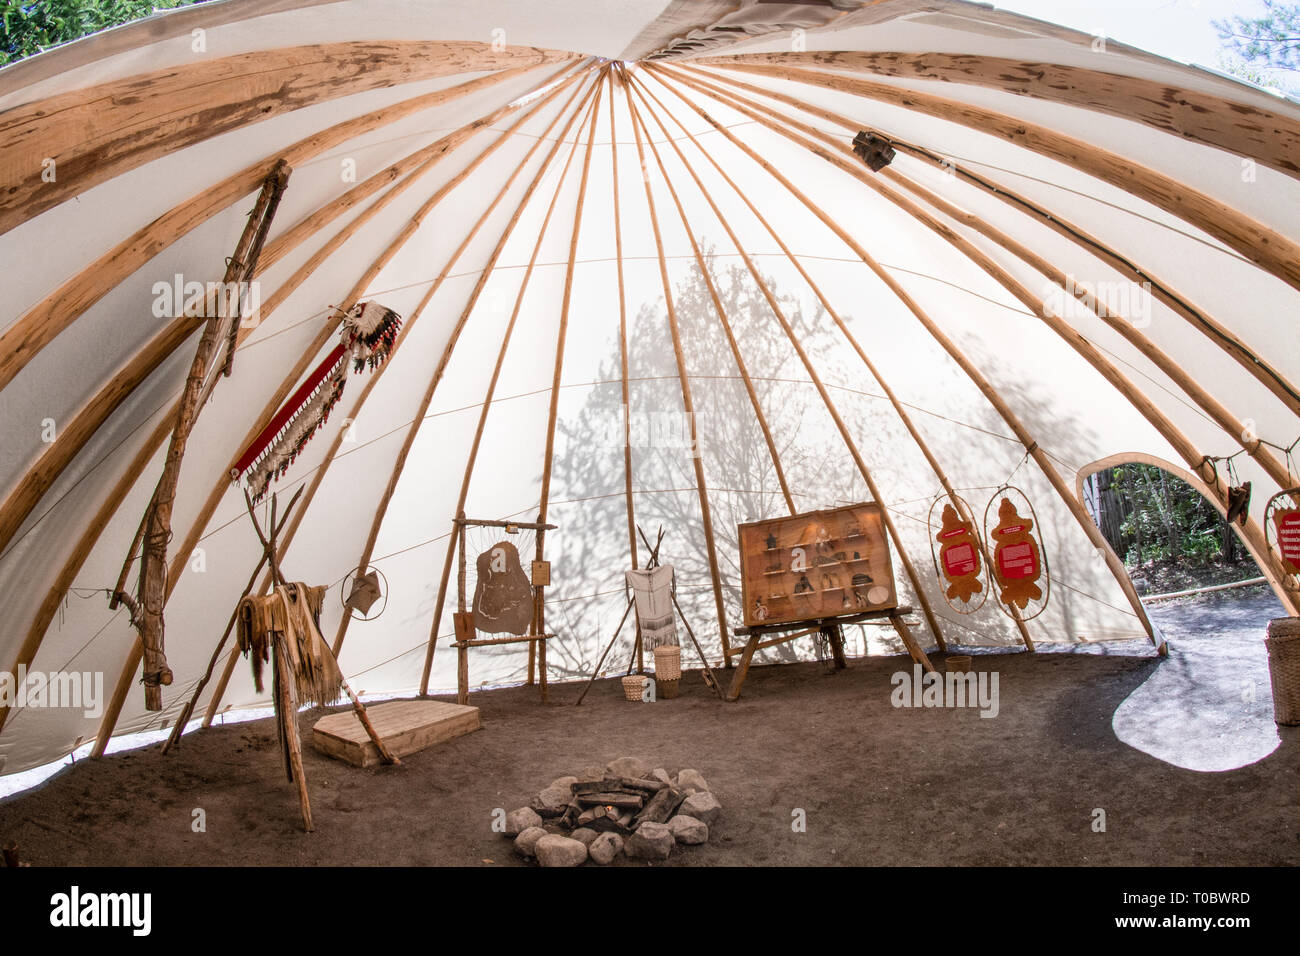 Inside a wigwam with some belongings Stock Photo